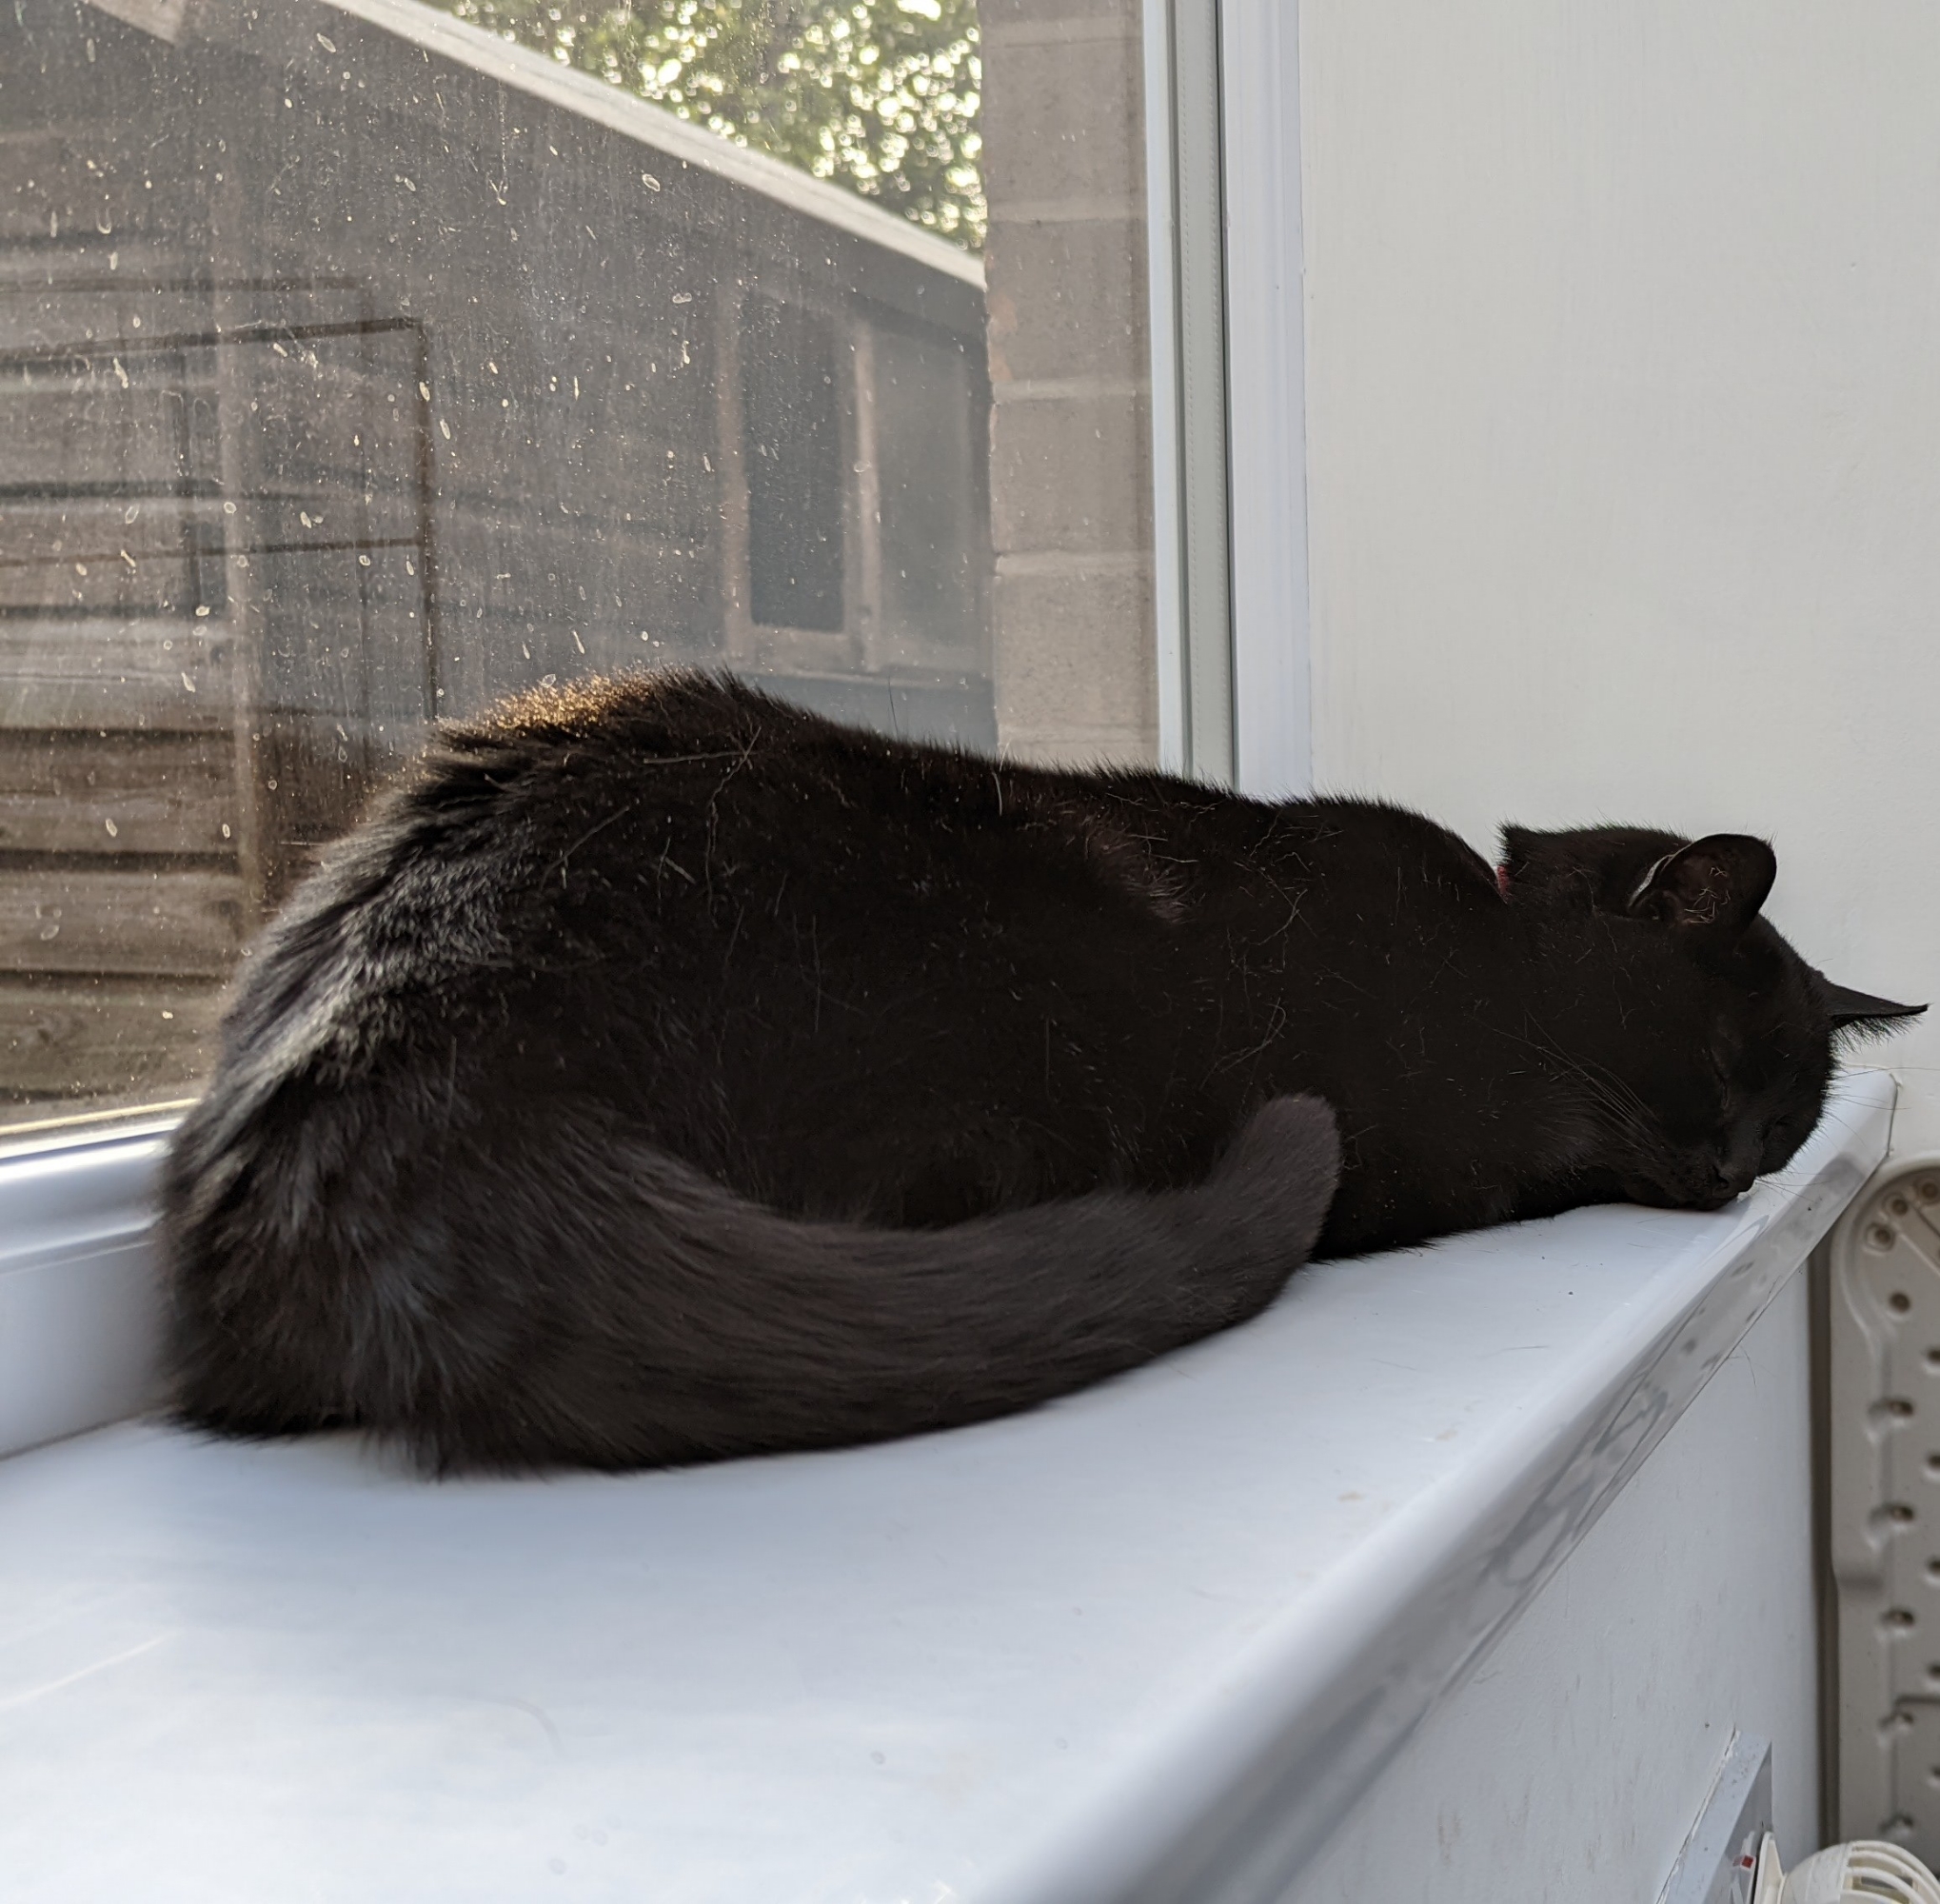 Morph the black cat sleeping on the conservatory side